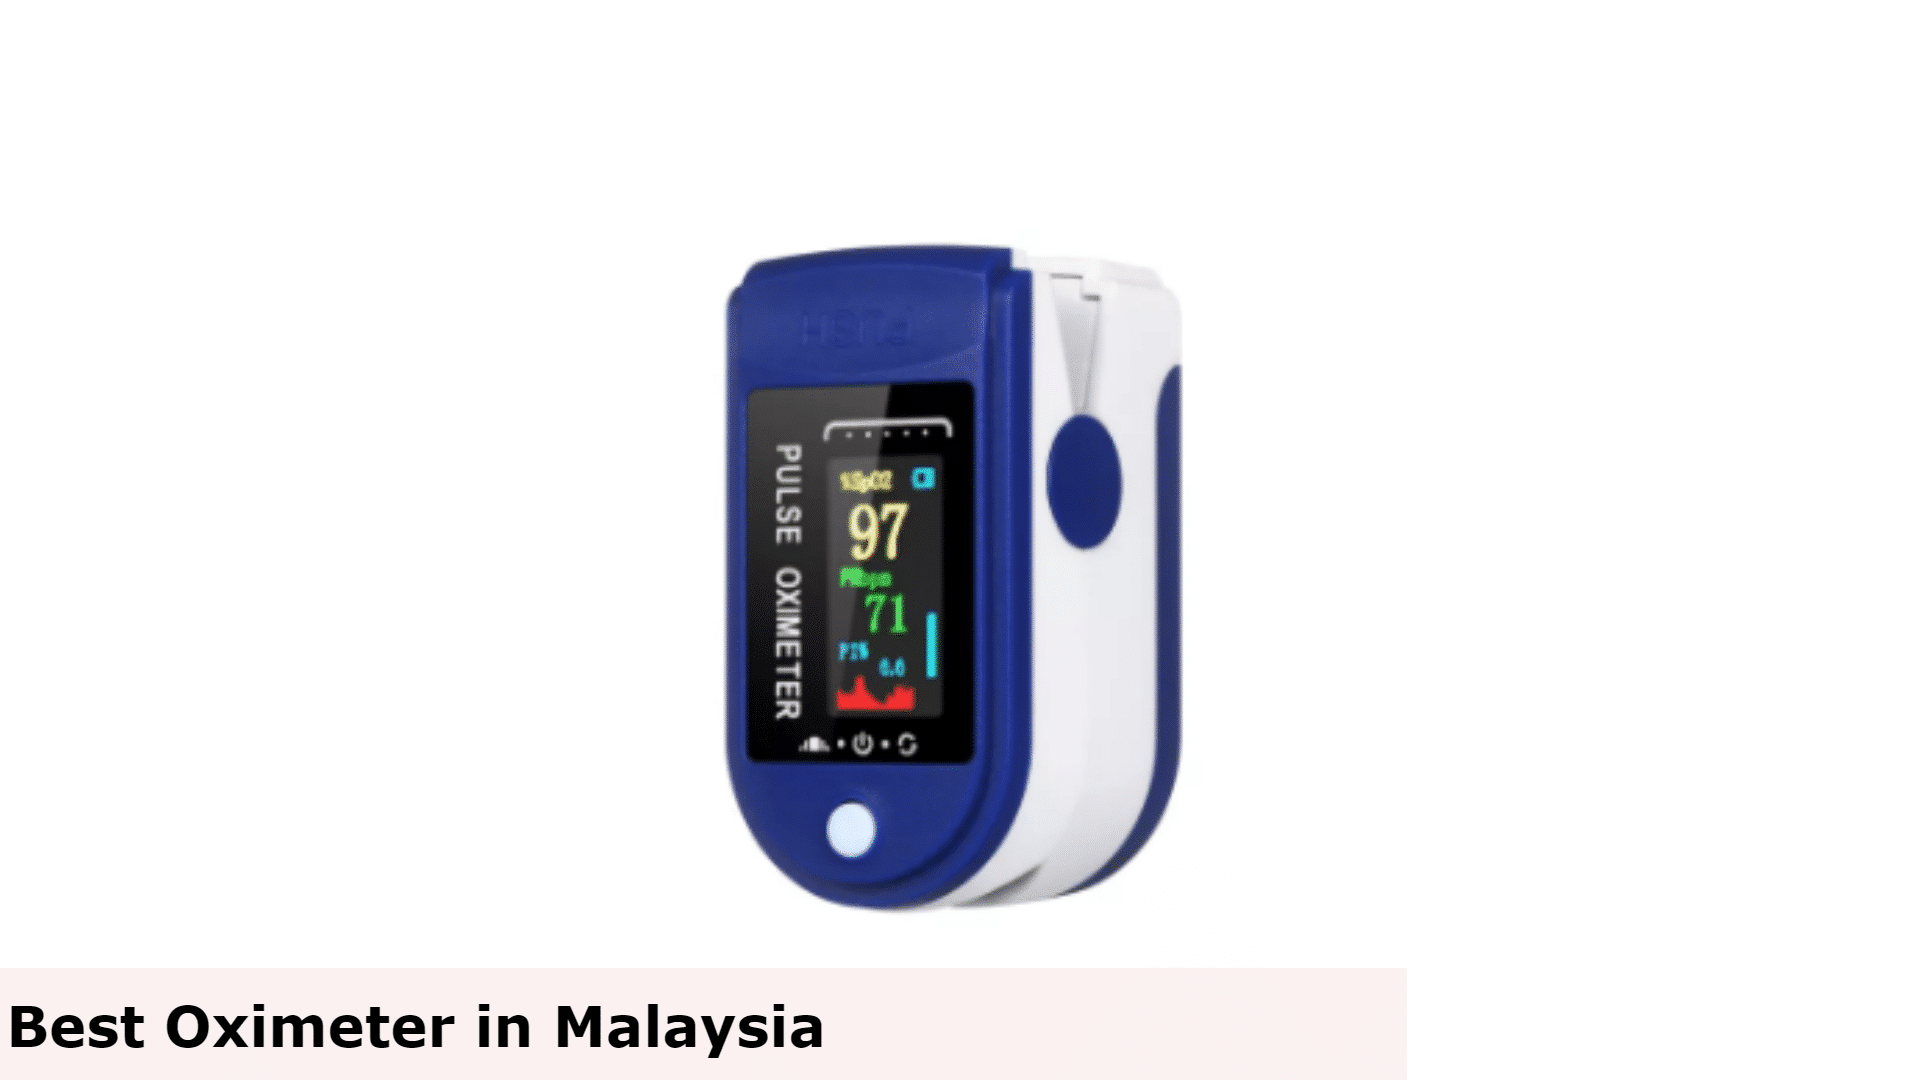 YOUWEMED Finger Pulse Oximeter - Best Oximeter in Malaysia, Oximeter Malaysia, How to use an Oximeter, oximeter reading Malaysia, oximeter normal range, pulse oximeter, oximeter price Malaysia, oximeter use, 
oximeter covid, oximeter amazon, Can an Oximeter Help Detect COVID-19 at Home, Blood oxygen levels Oximeter Malaysia,